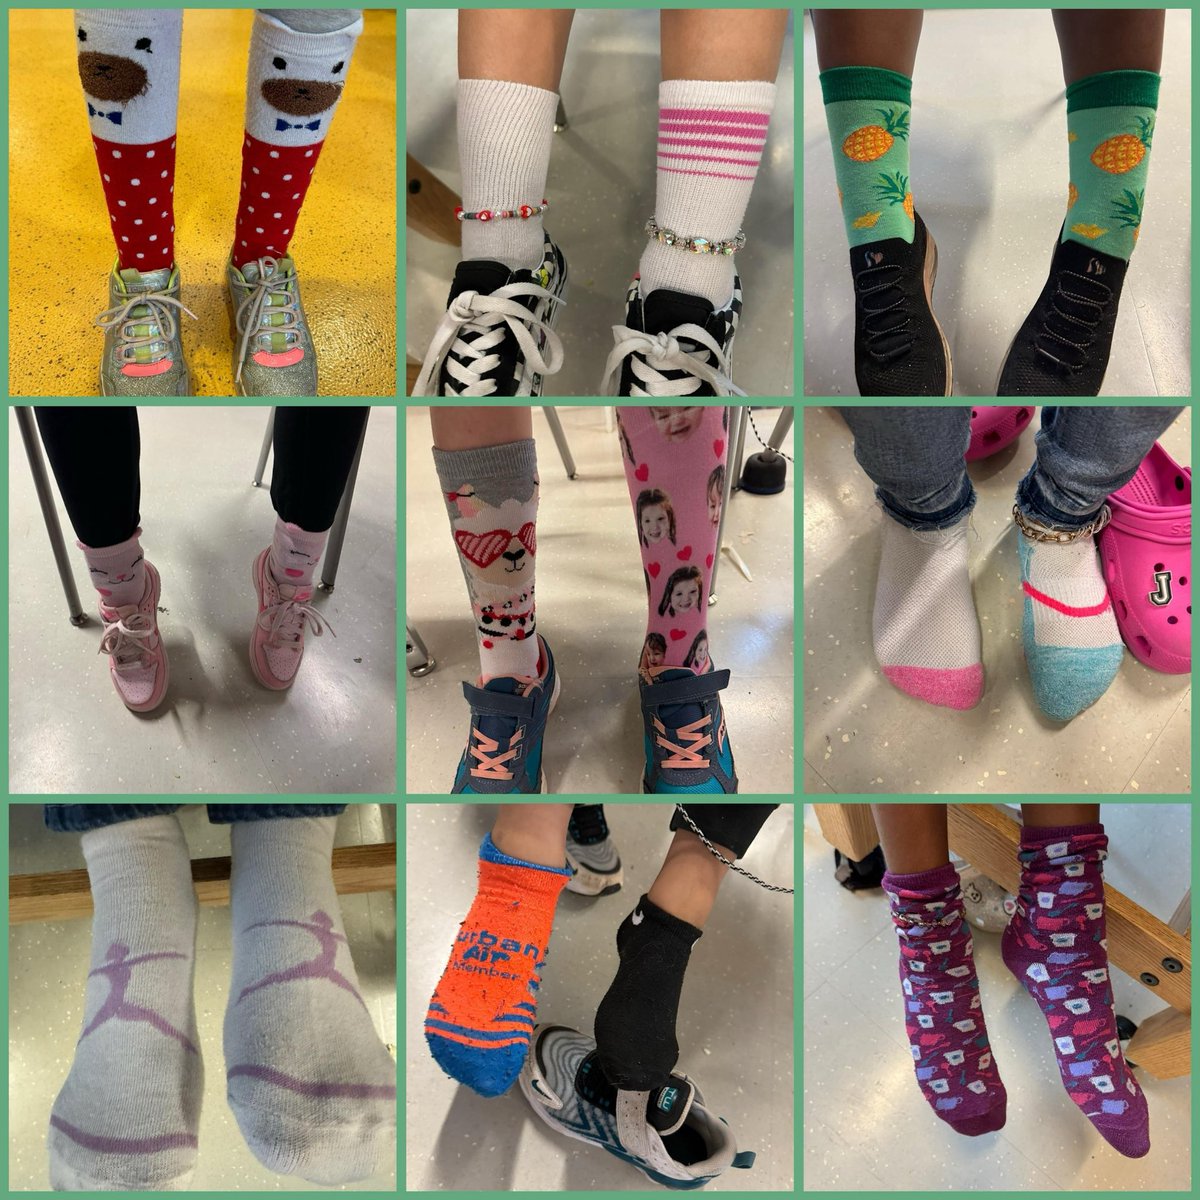 Day 4 of #ChildrensMentalHealthMatters Week: Wacky Sock Day!!! We wore our most unique socks to represent loving our differences and choosing kindness. Checkout a few cool socks! @gwes_pta @PGCPSTAG @pgcps